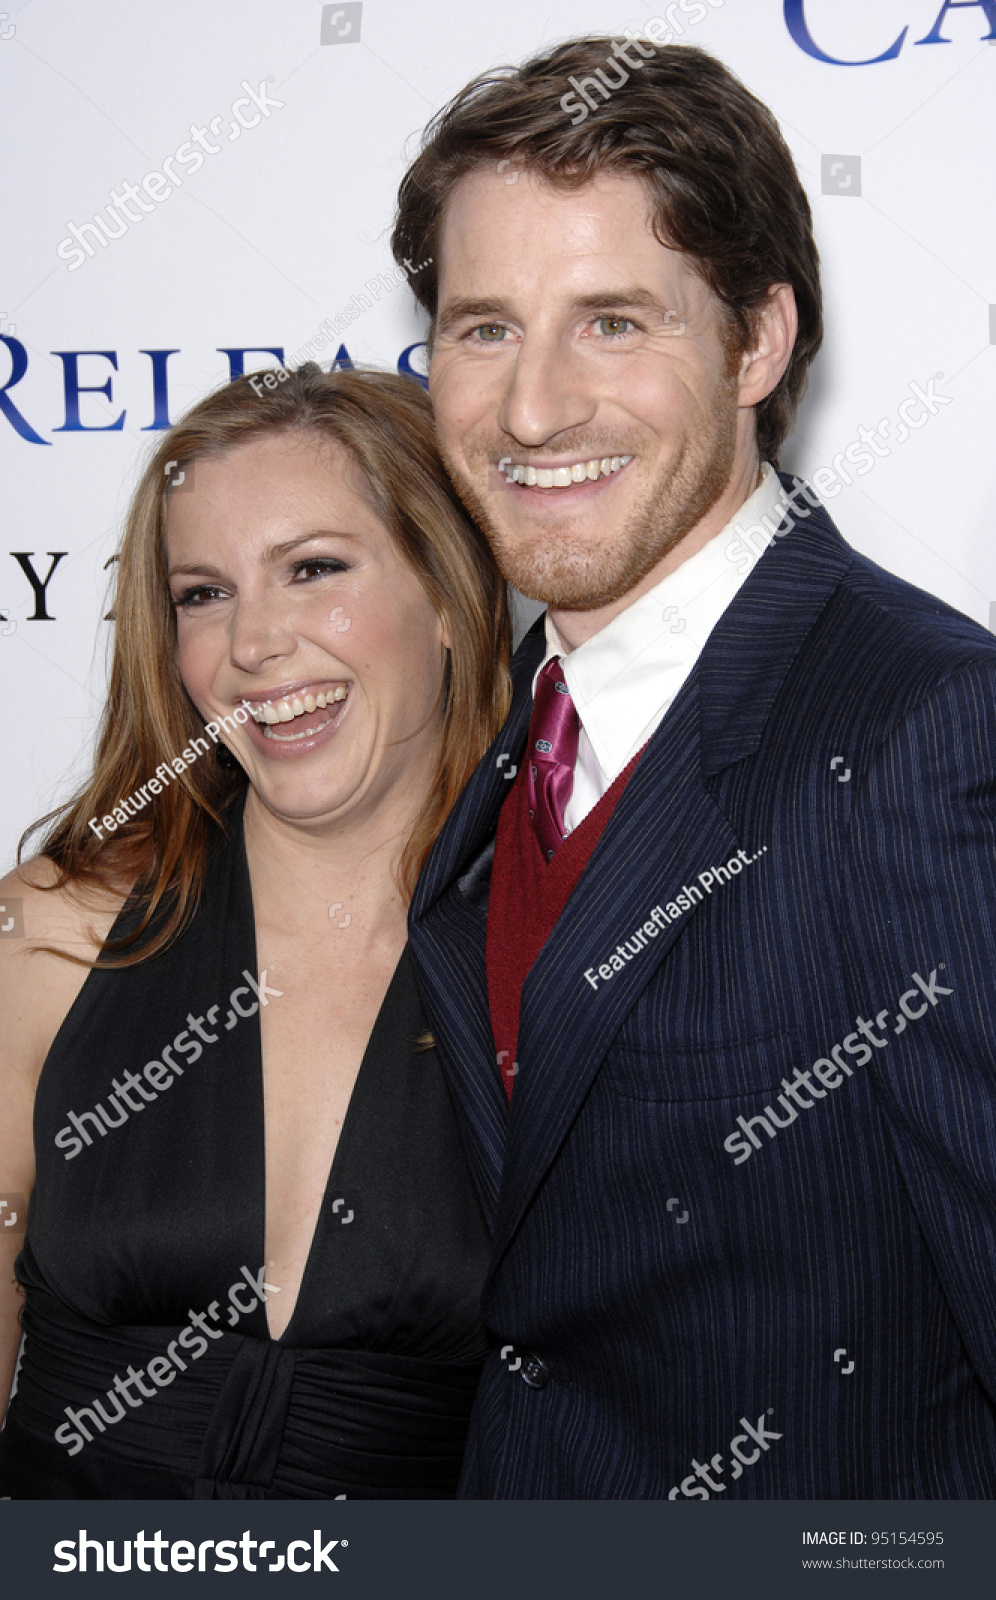 Sam Jaeger & Wife Amber At The World Premiere Of His New Movie 